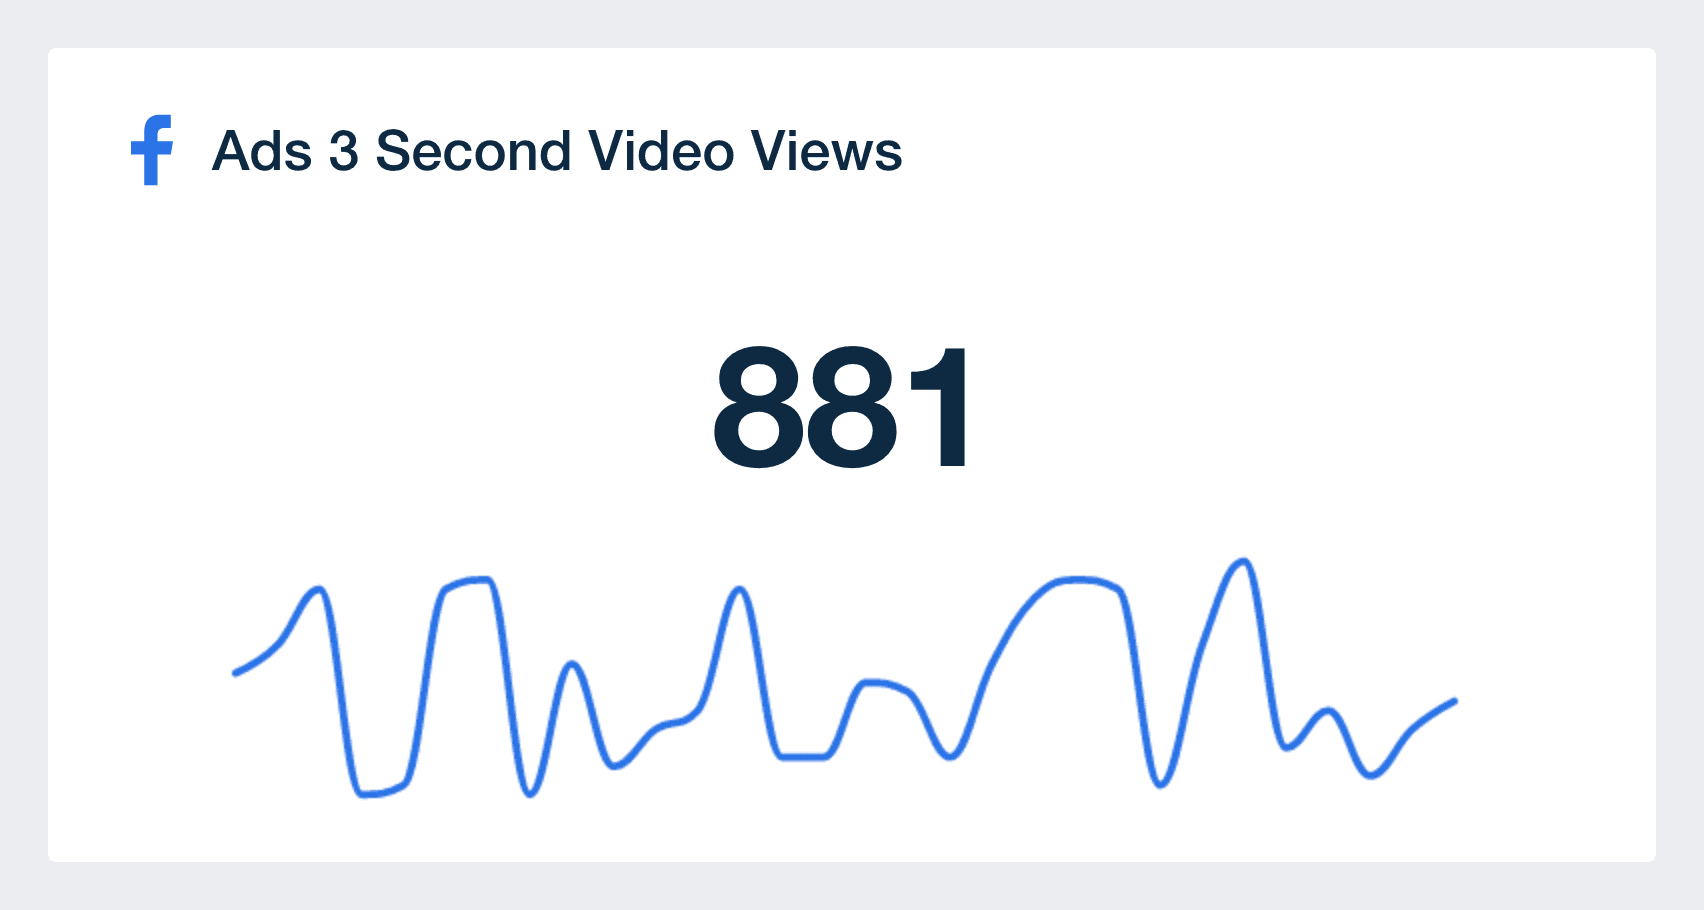 Facebook Ads 3 second video views Metric in Dashboard Template